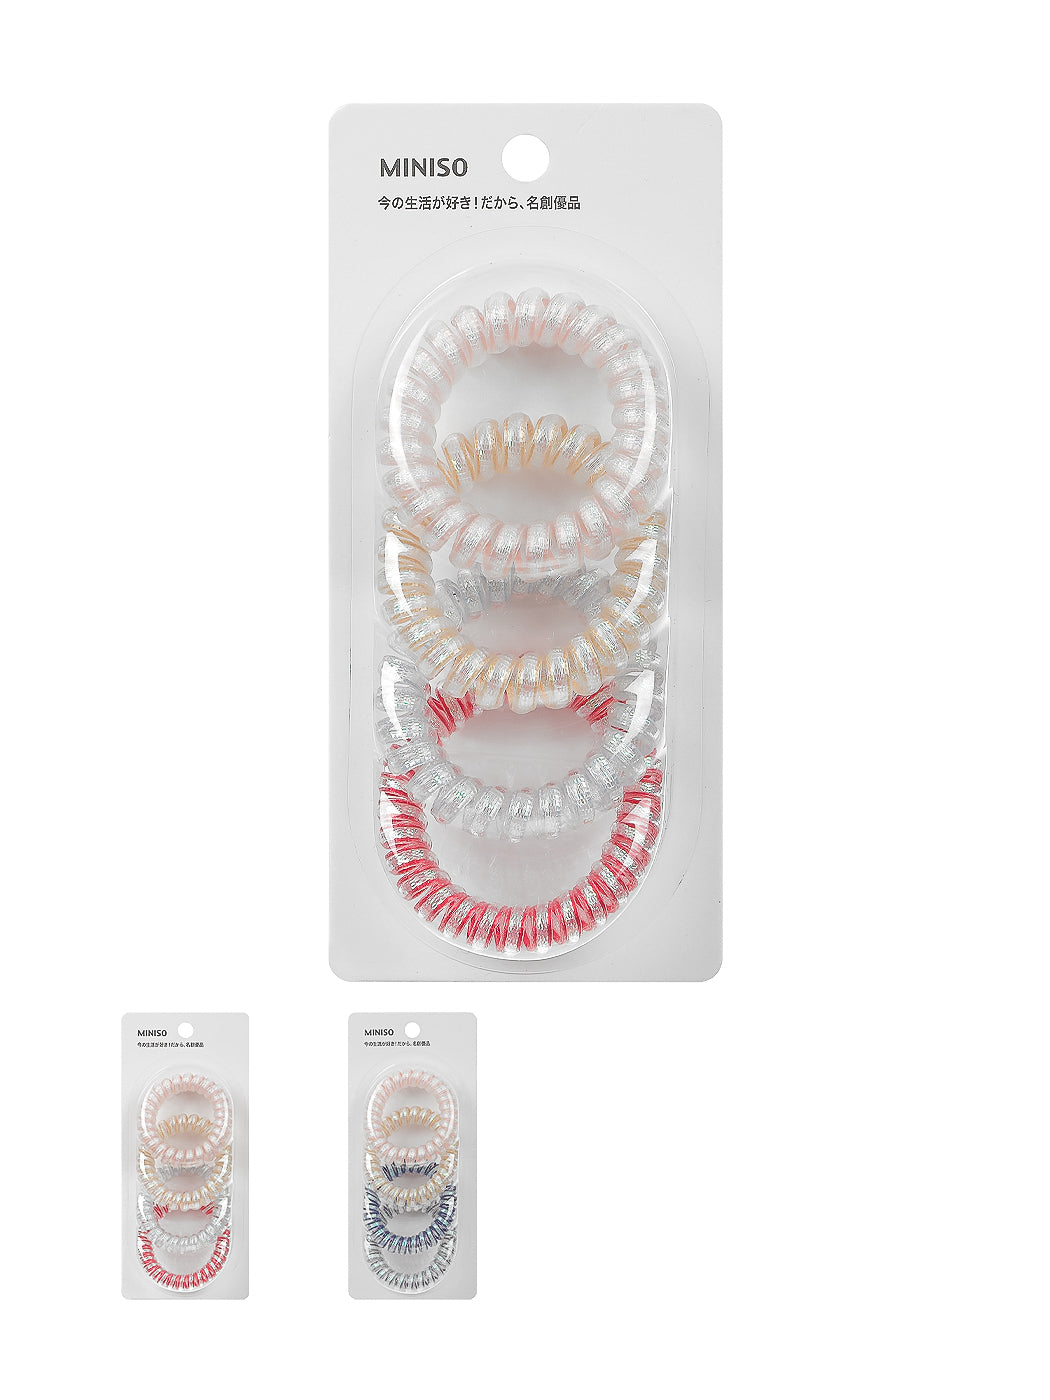 MINISO 5.0 COLORED SPIRAL HAIR TIES (4PCS) 2009806710104 HAIR TIE